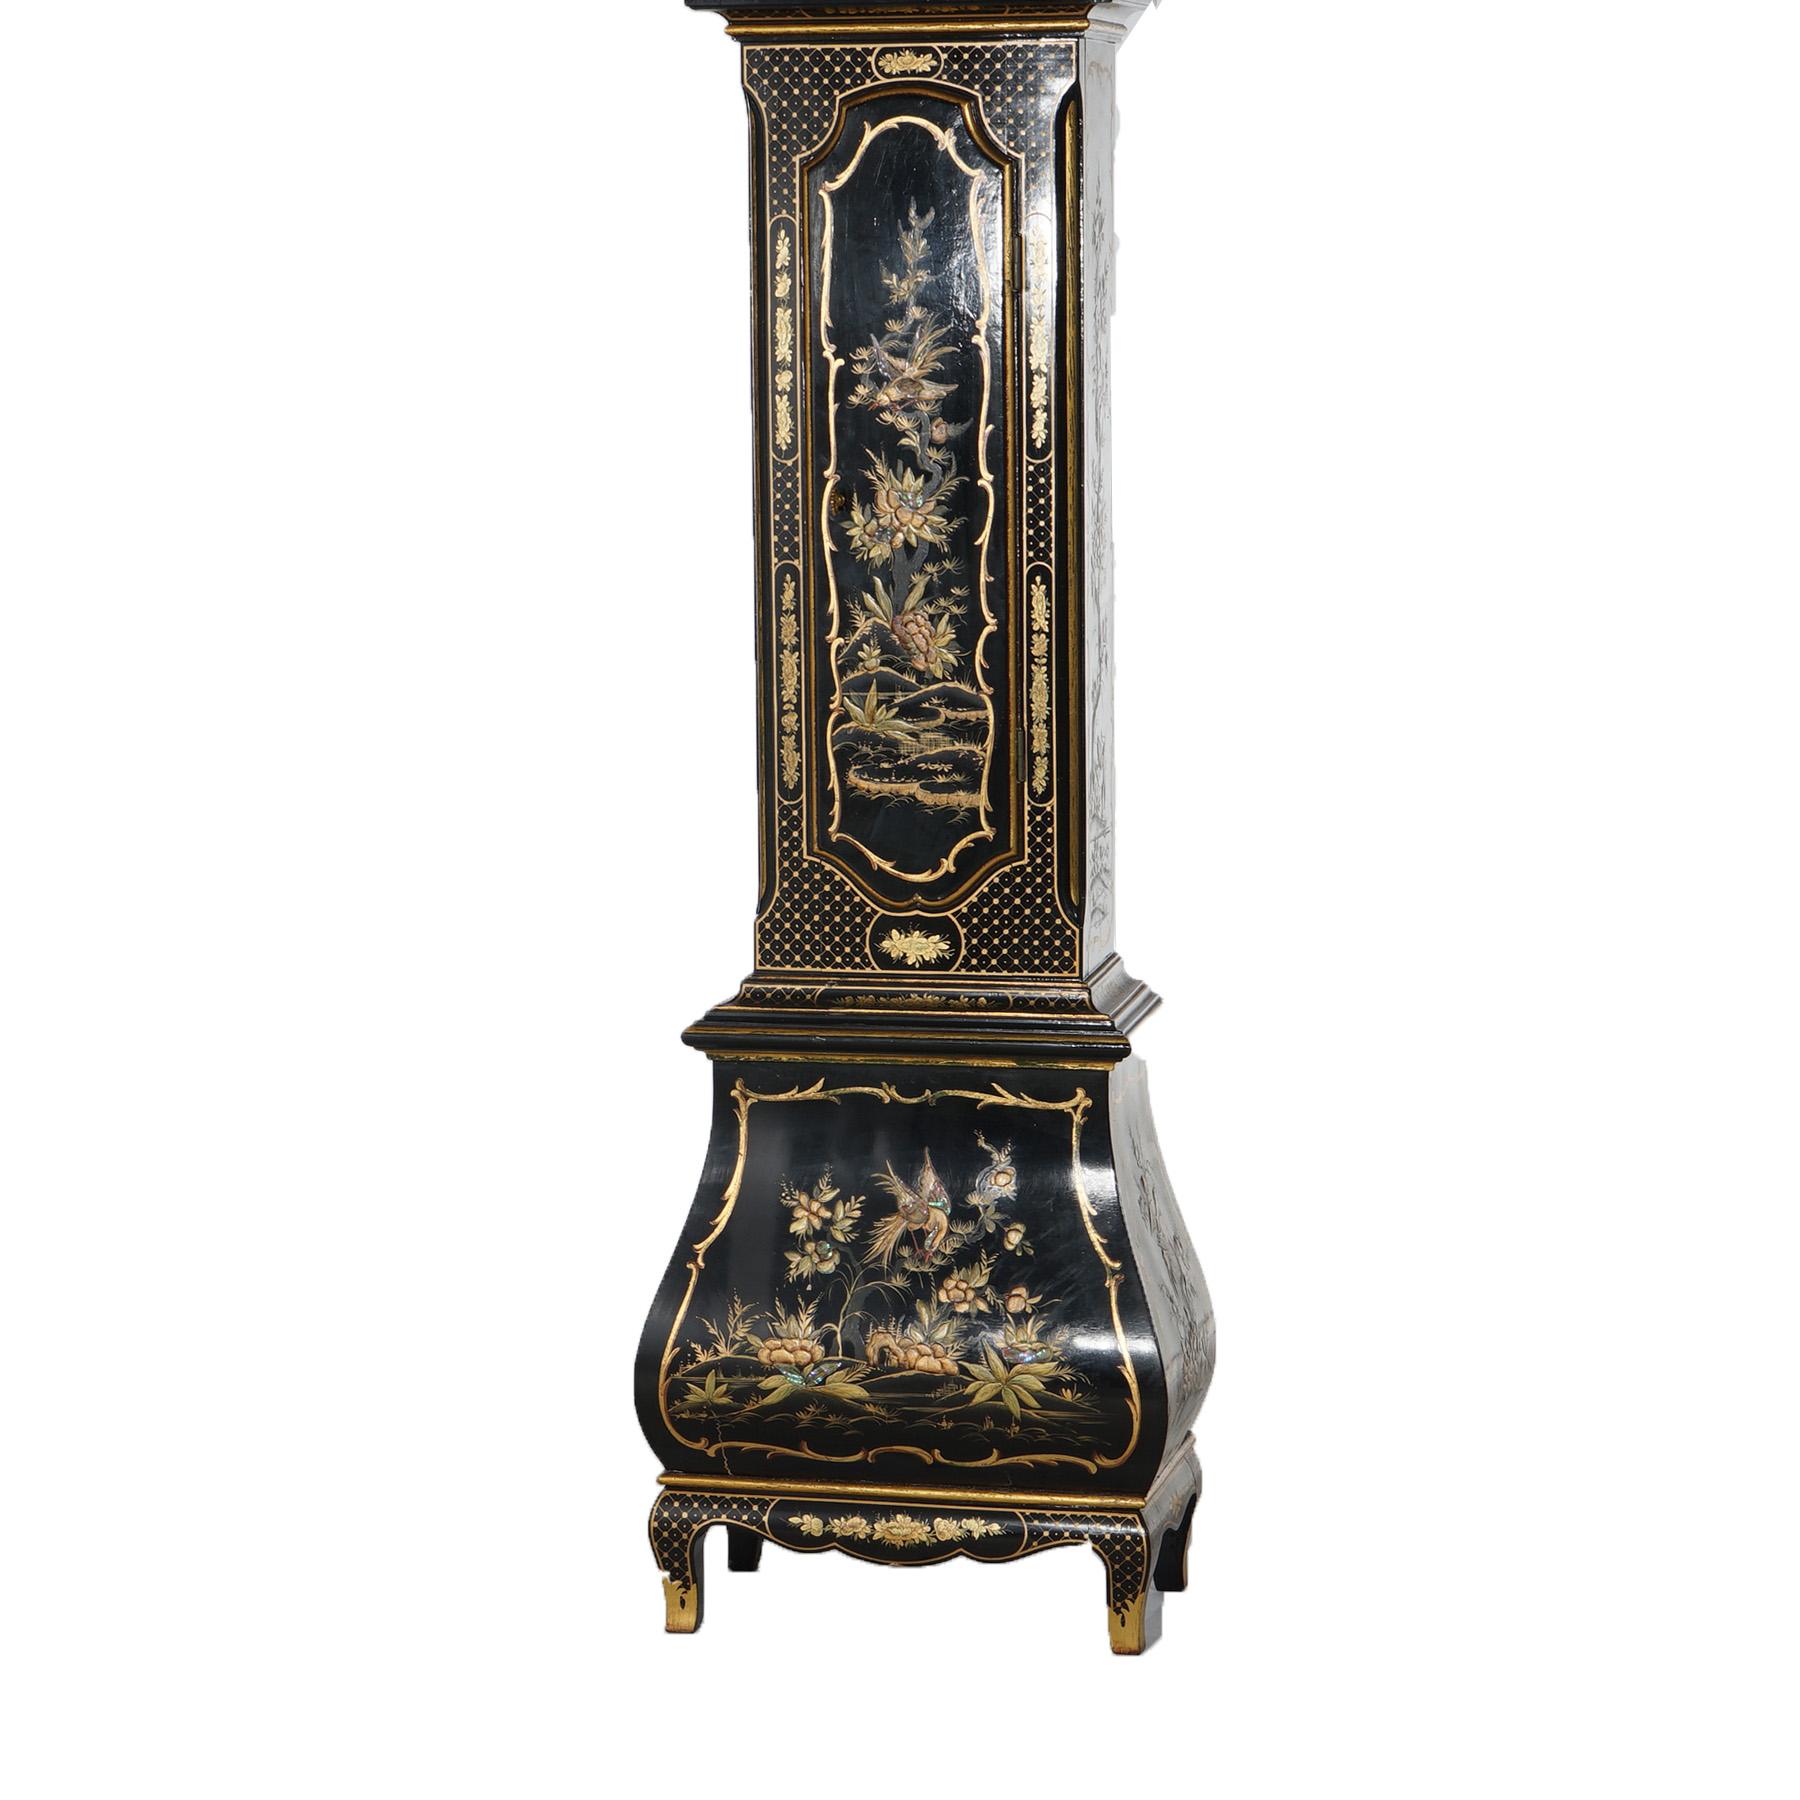 German Chinoiserie Gilt Decorated Black Lacquer Petite Tall Case Clock 20th C 5